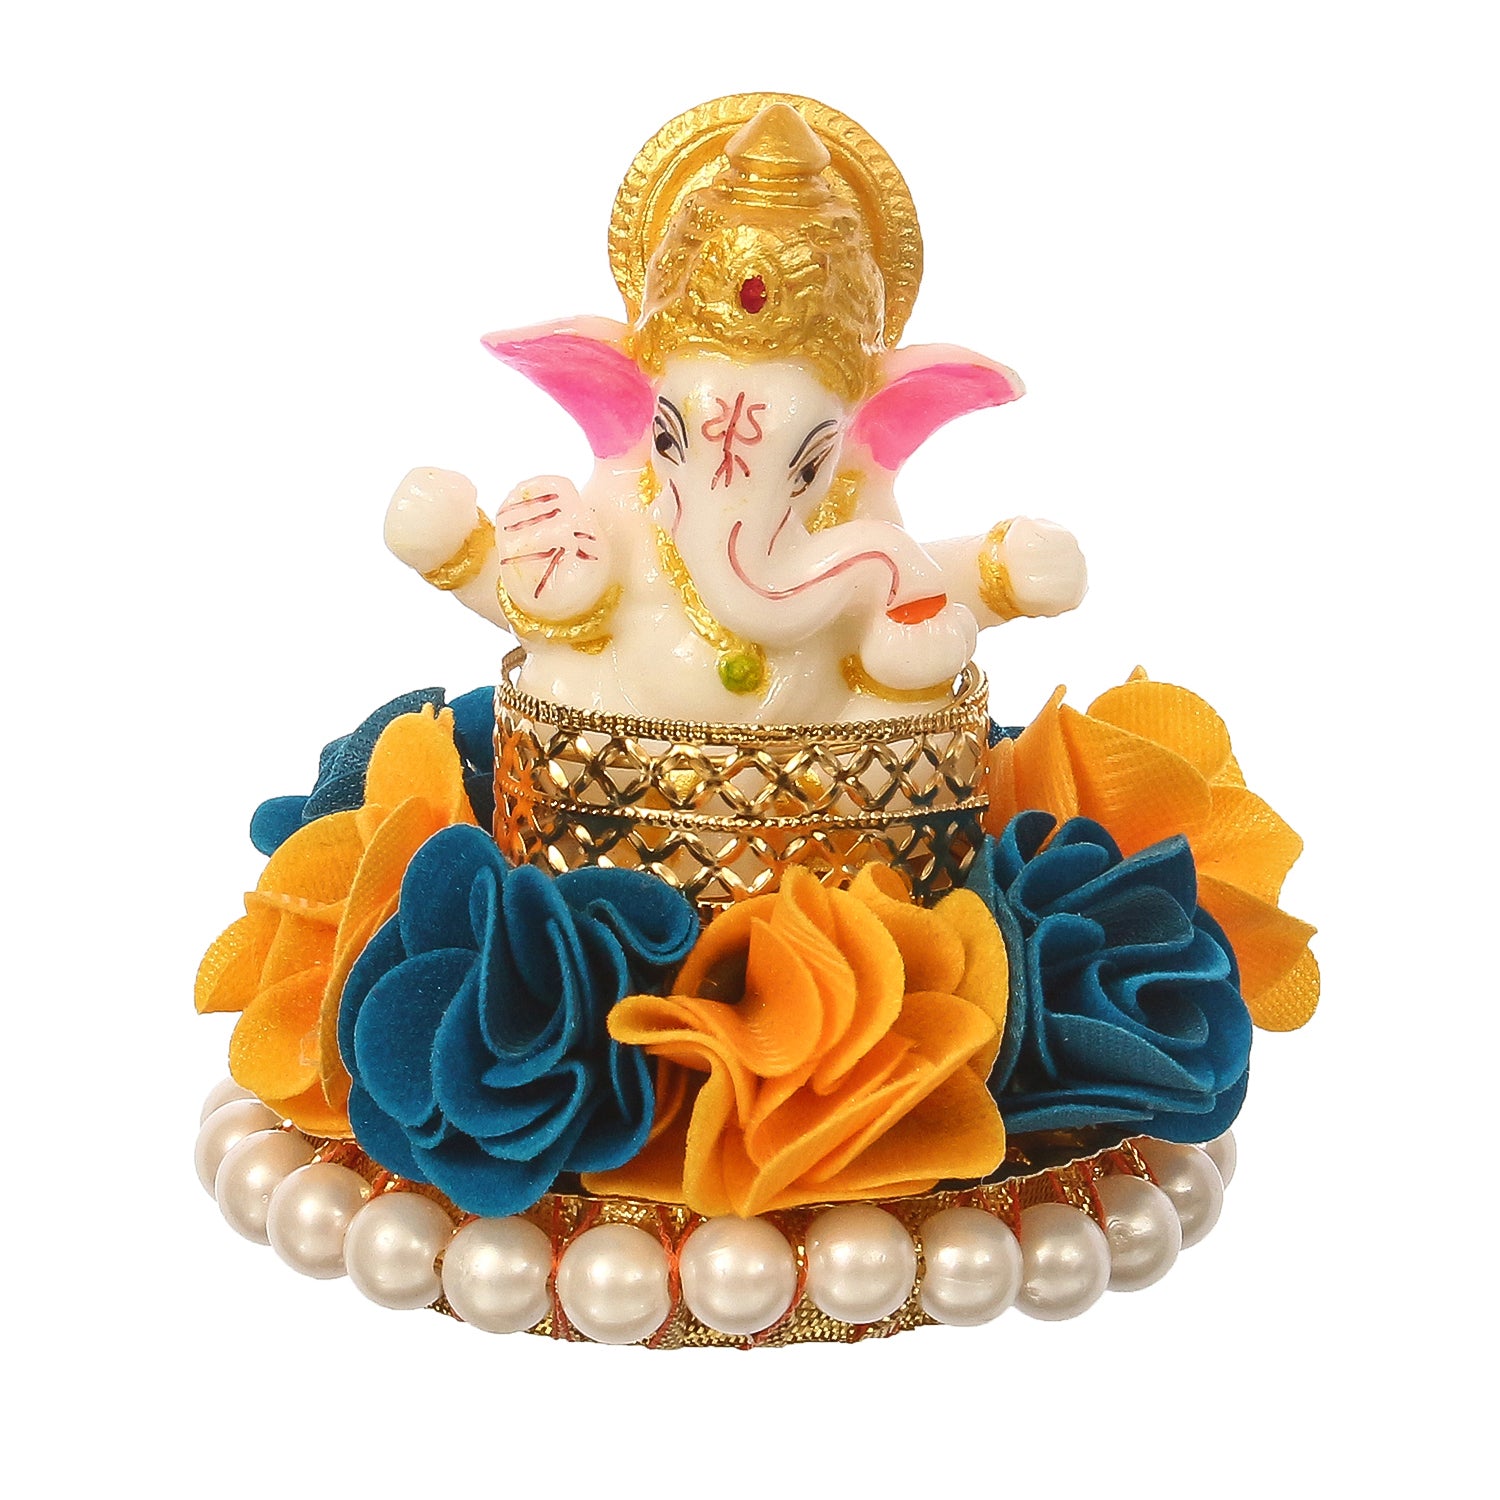 Lord Ganesha Idol on Decorative Handcrafted Plate with Yellow and Blue Flowers 2